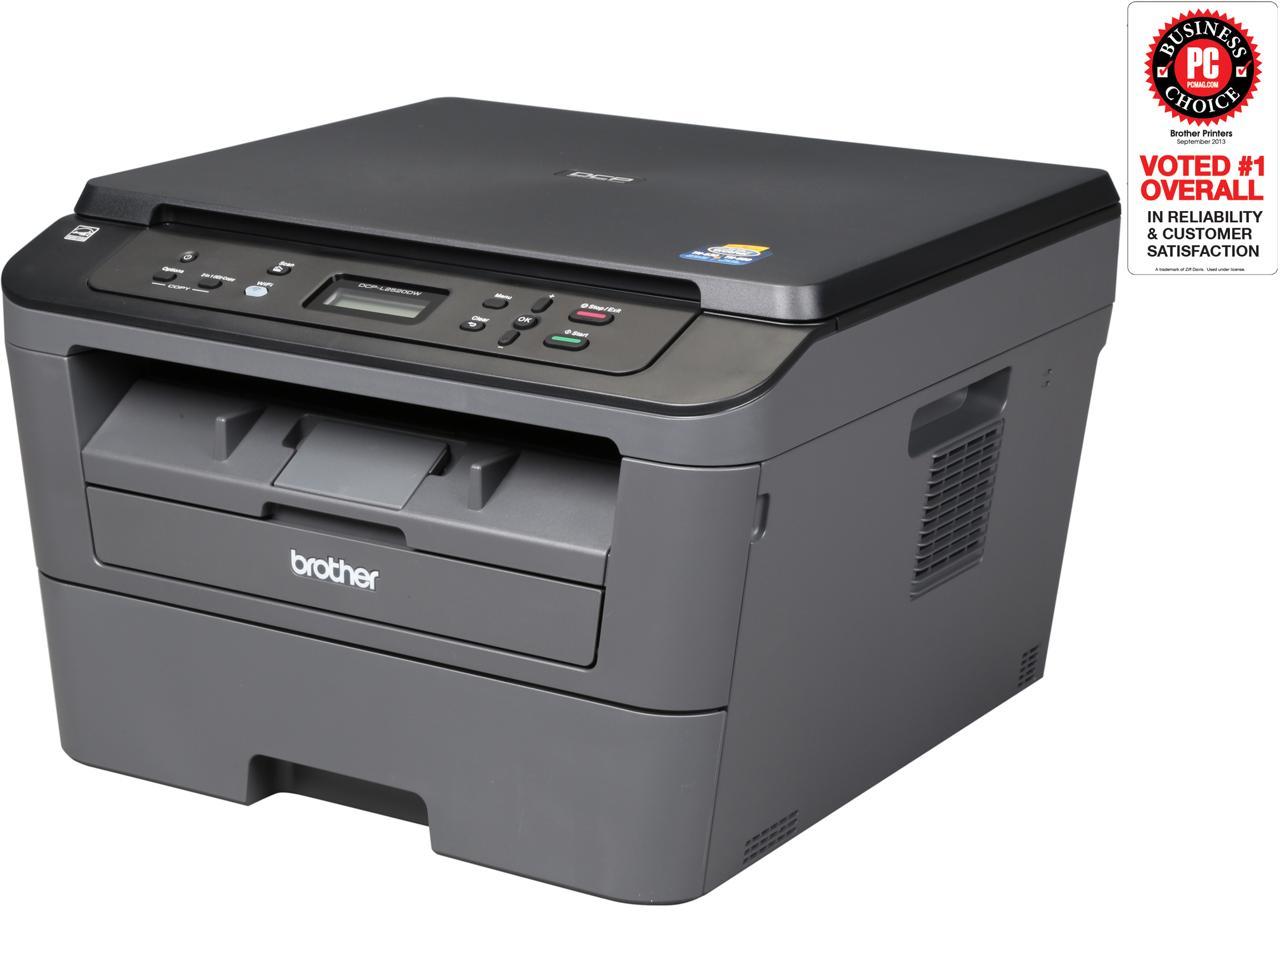 Бротхер принтер dcp. Brother DCP-l2520dw. Brother DCP-l2540dn. Принтер brother DCP. Brother DCP-l2512d.